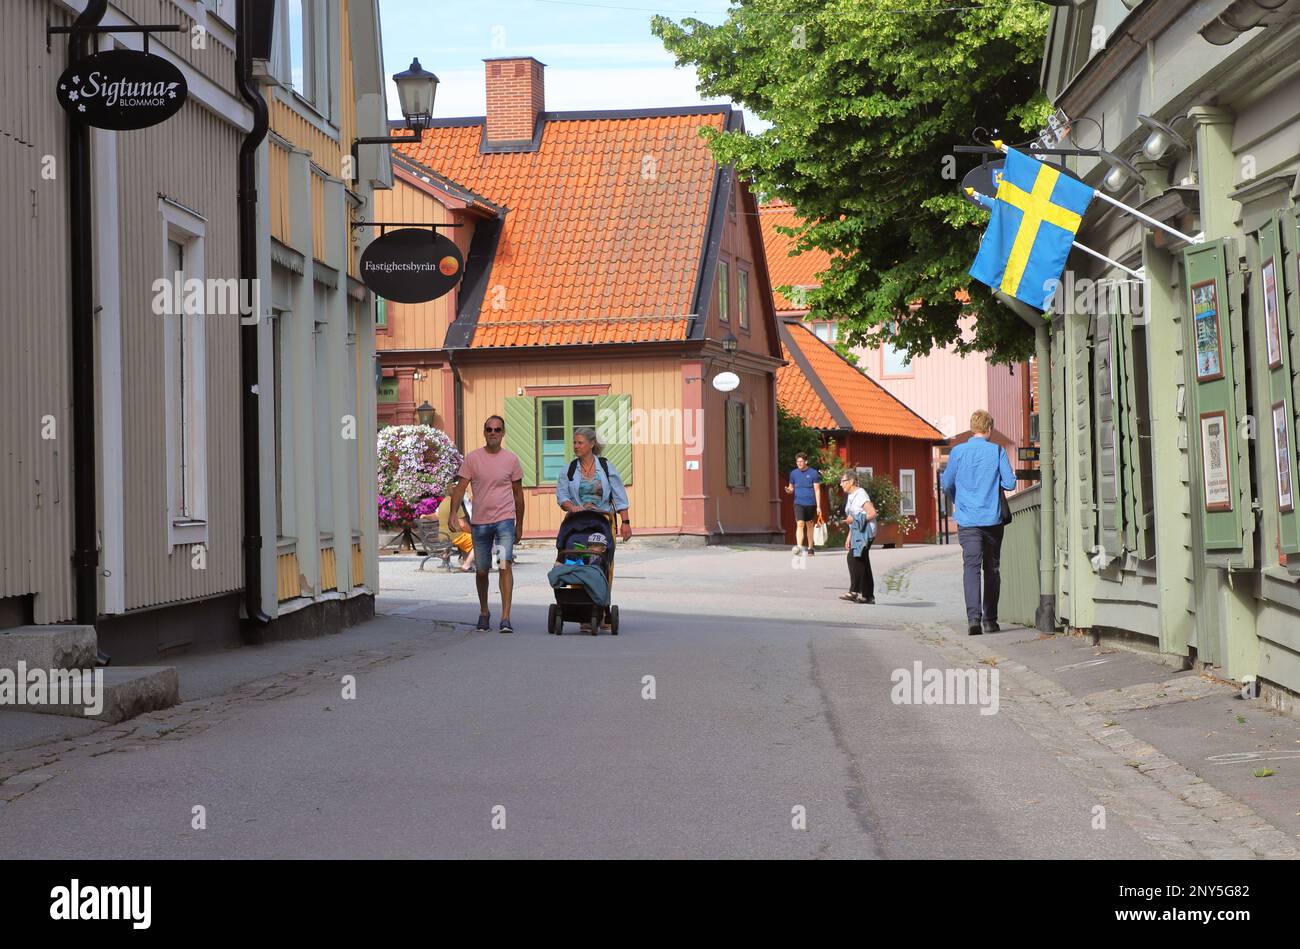 Sigtuna, Sweden - July 2, 2022: People at the Stora gatan in Sigtuna city center. Stock Photo